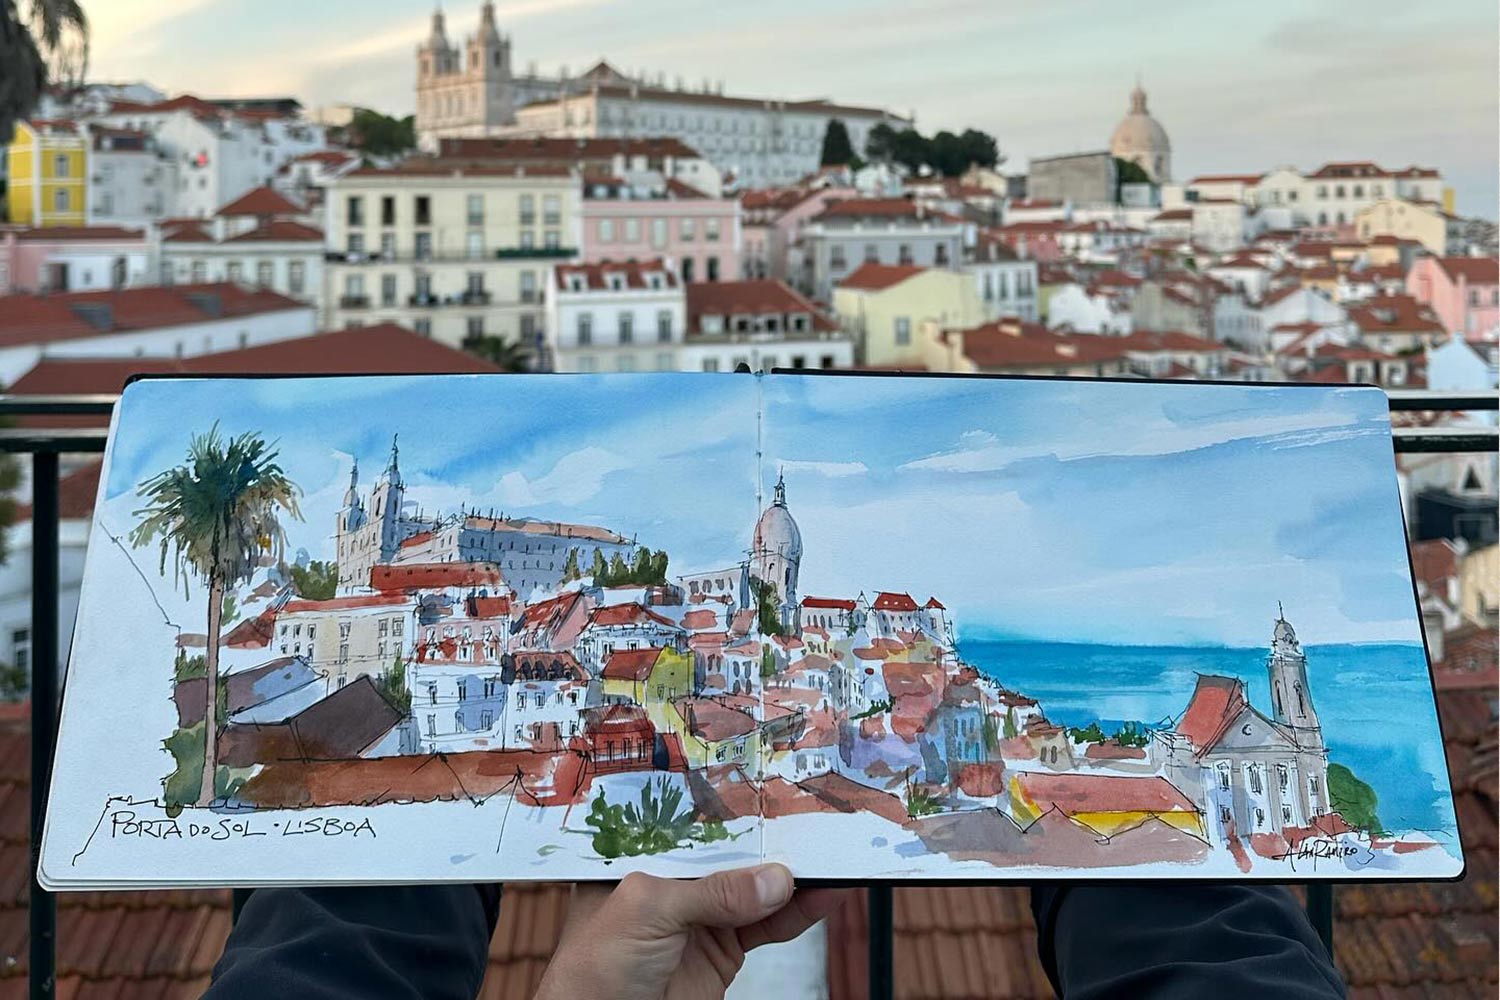 Colorful sketch of Portas do Sol, Lisboa, Portual held in front of the view